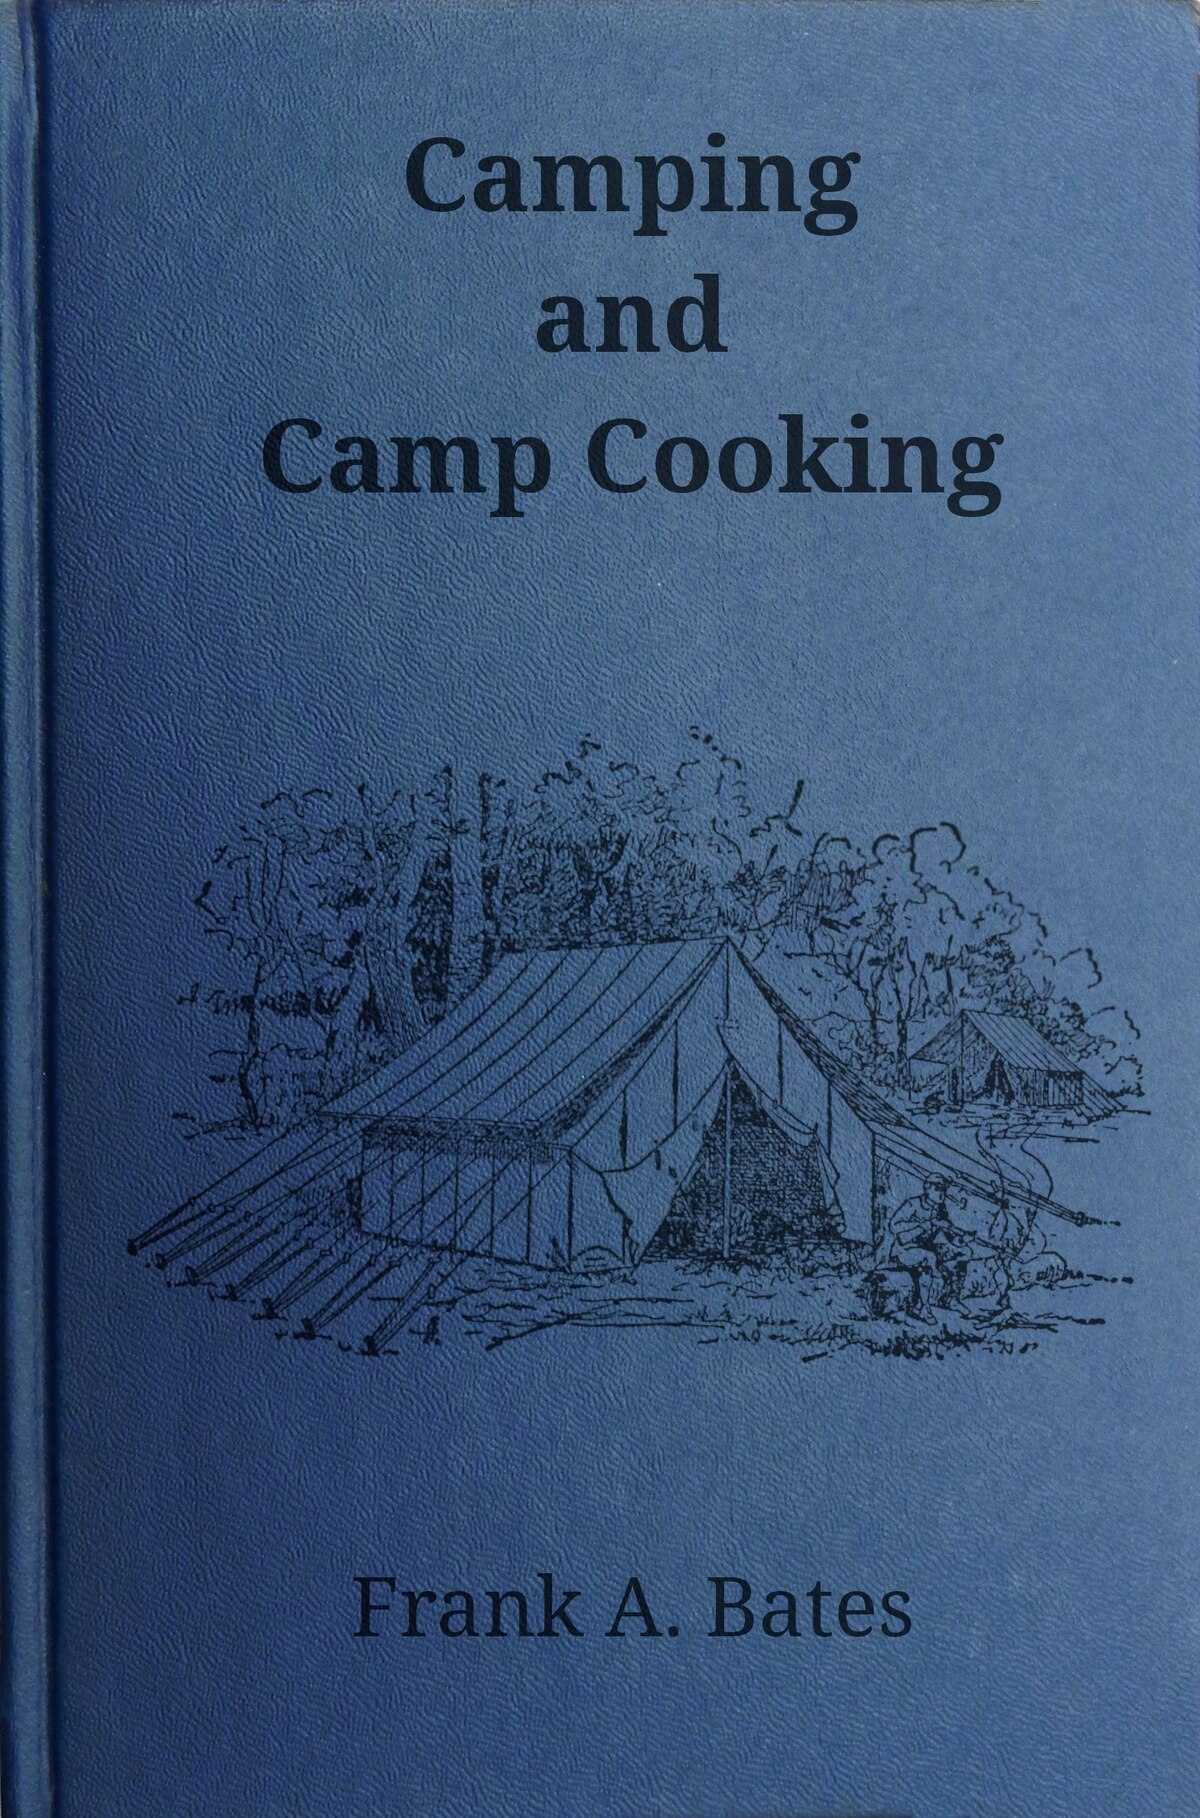 Front cover: Camping and Camp Cooking - Frank A. Bates